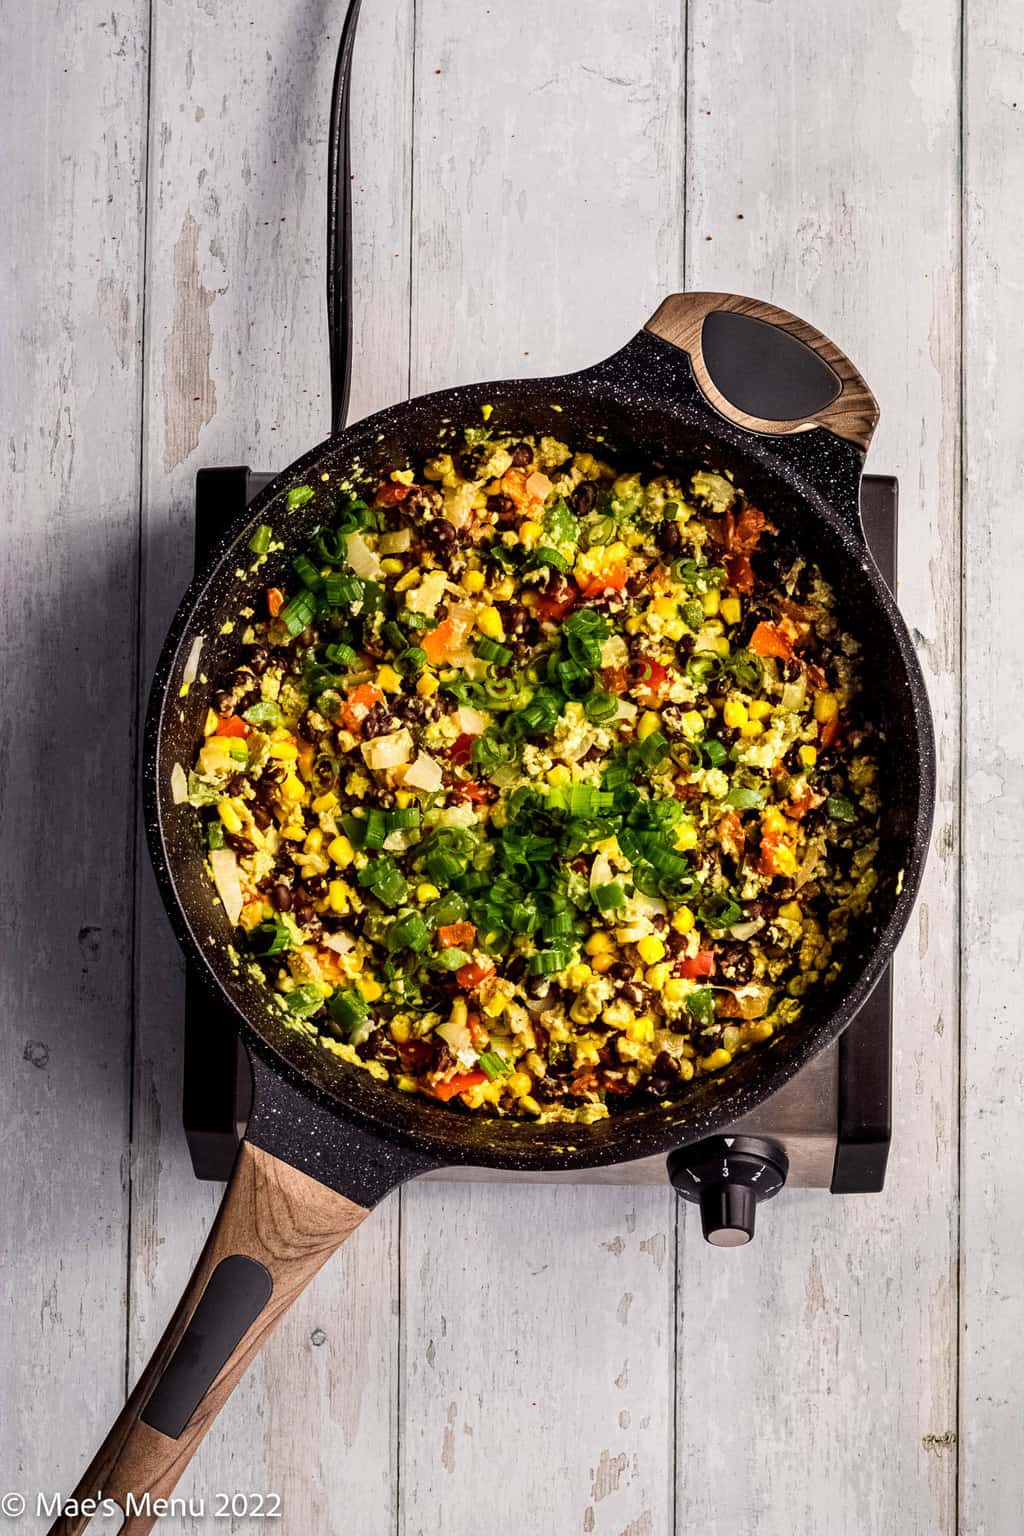 An overhead shot of a skillet of veggies, beans, and eggs.